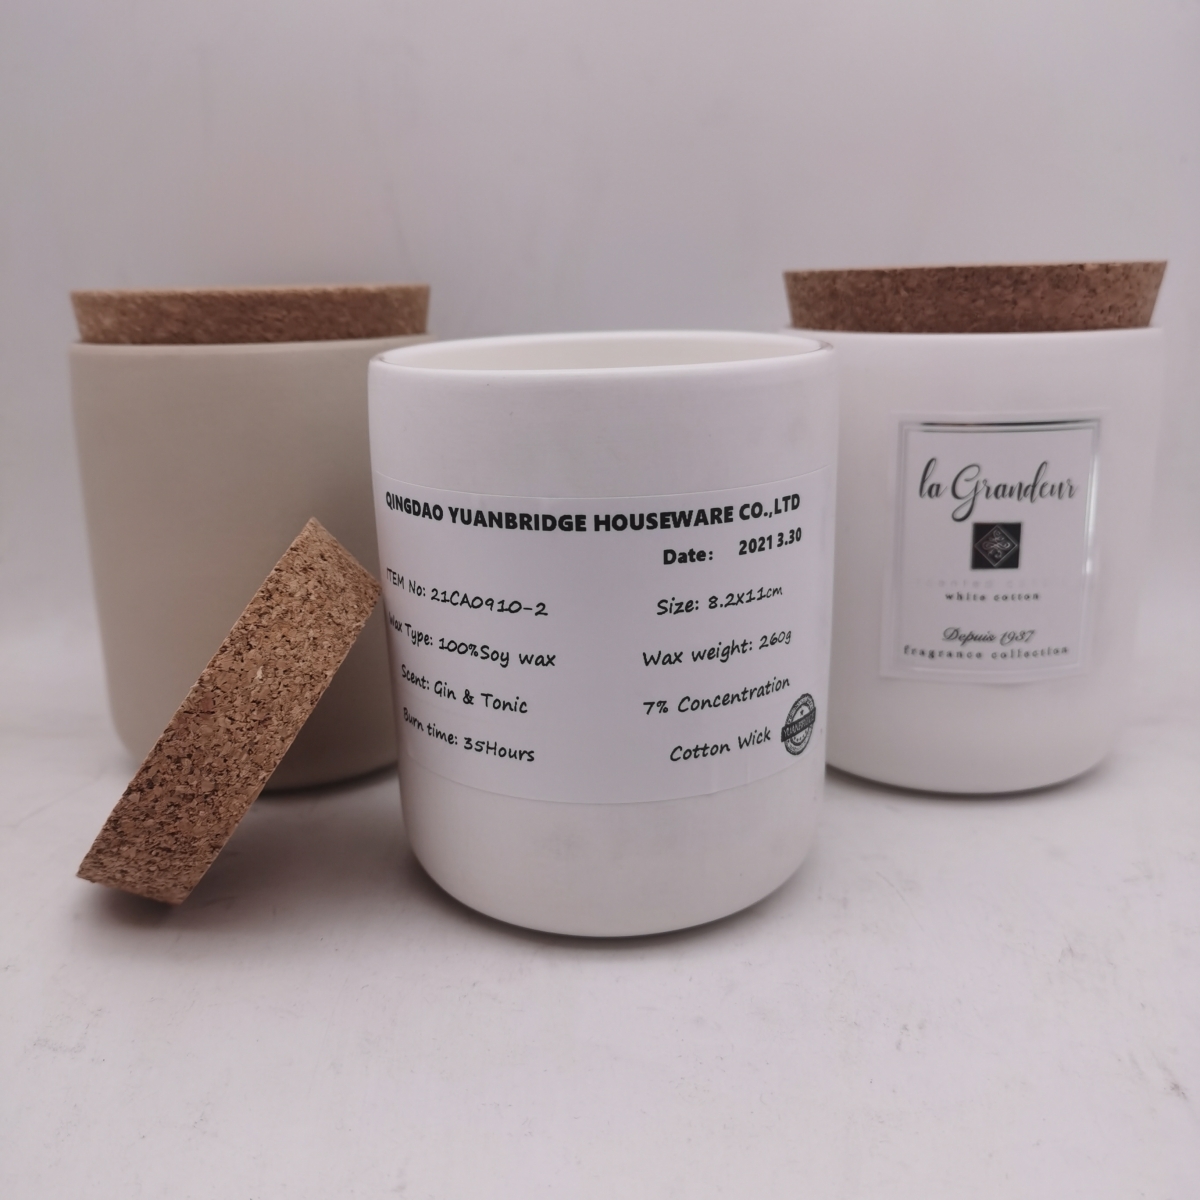 Scented Candles：White Ceramic Jar ,Cork lid ,Vegan Candles ,Private Label ,China Factory ,Price-HOWCANDLE-Candles,Scented Candles,Aromatherapy Candles,Soy Candles,Vegan Candles,Jar Candles,Pillar Candles,Candle Gift Sets,Essential Oils,Reed Diffuser,Candle Holder,